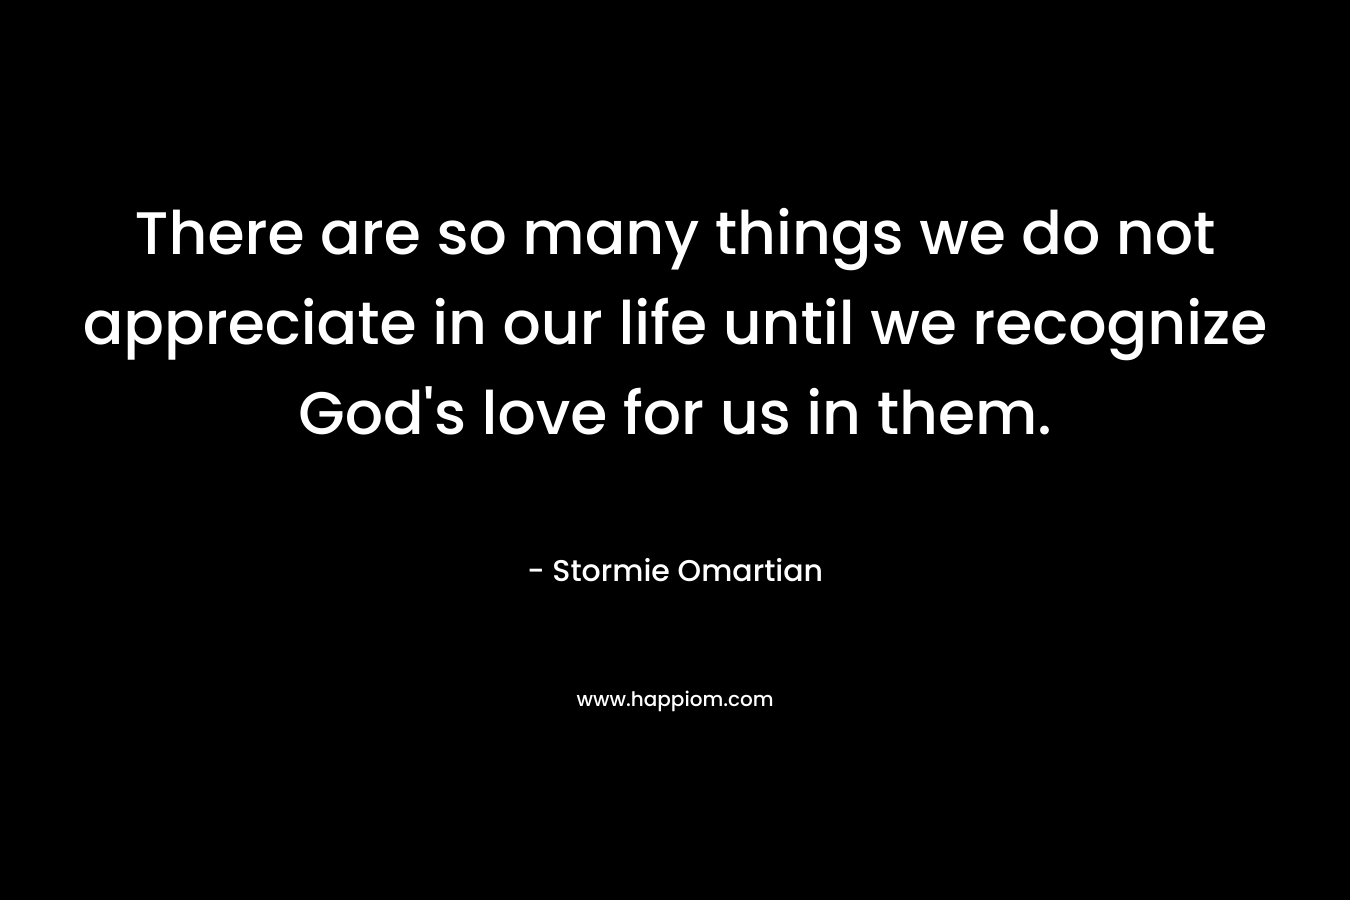 There are so many things we do not appreciate in our life until we recognize God's love for us in them.